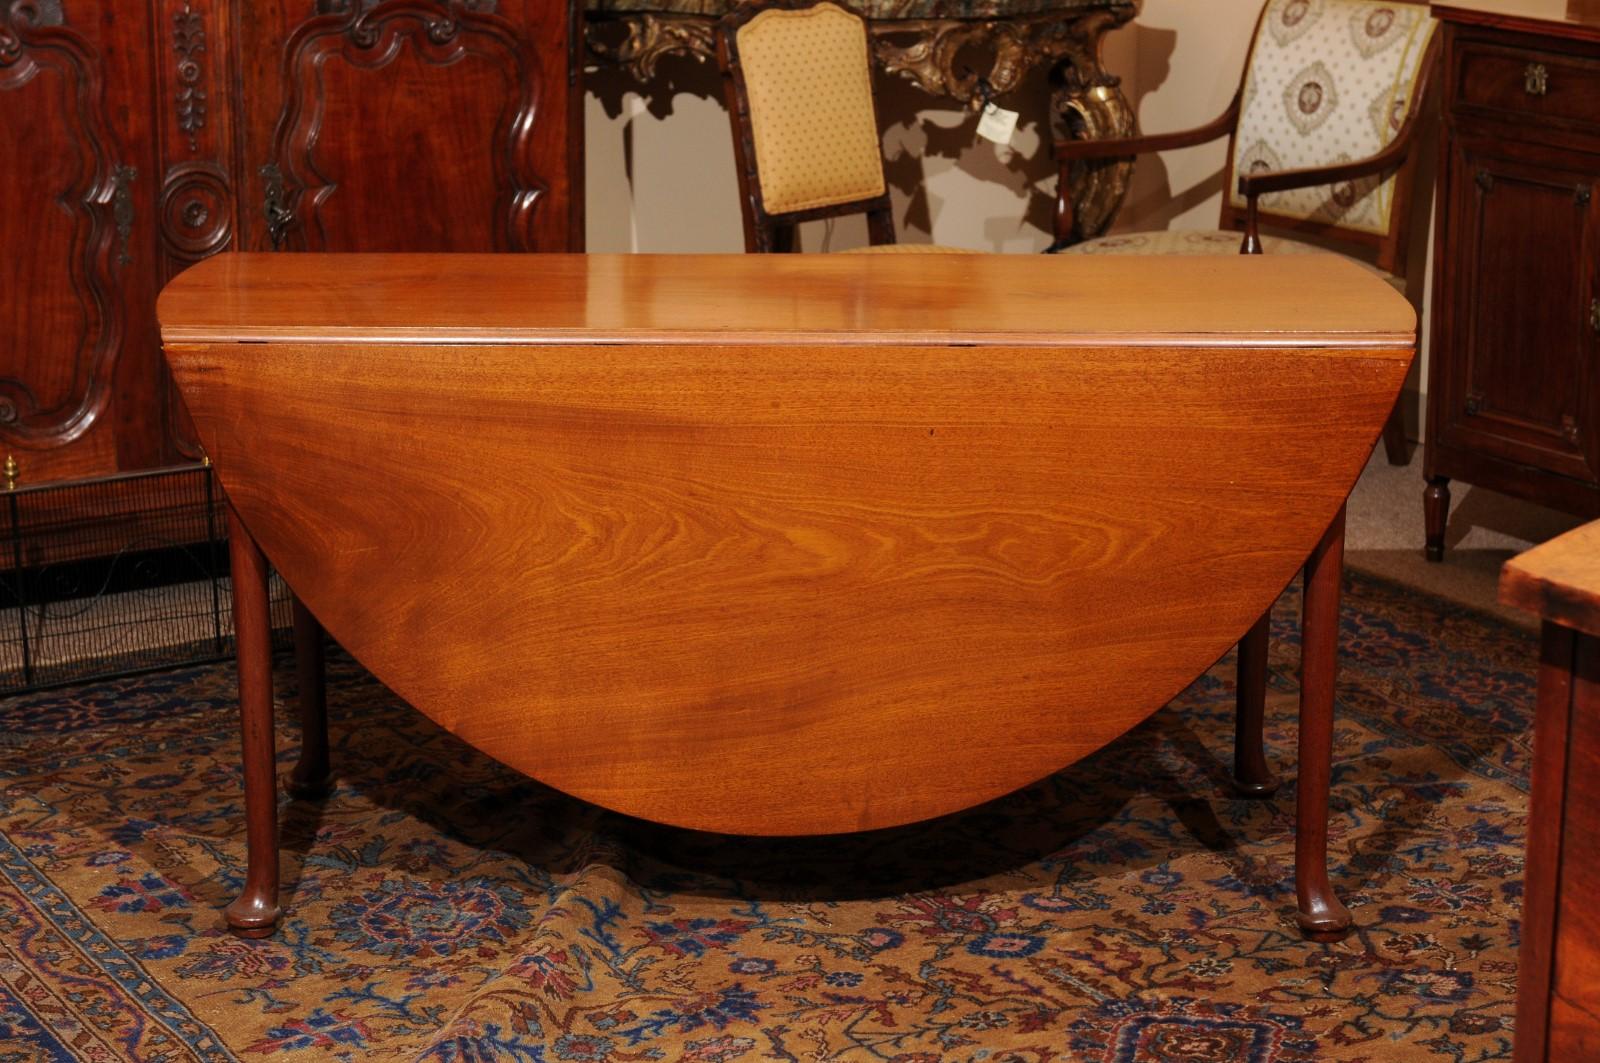  Mid-18th C English George II Mahogany Drop Leaf Oval Dining Table with Pad Feet For Sale 5